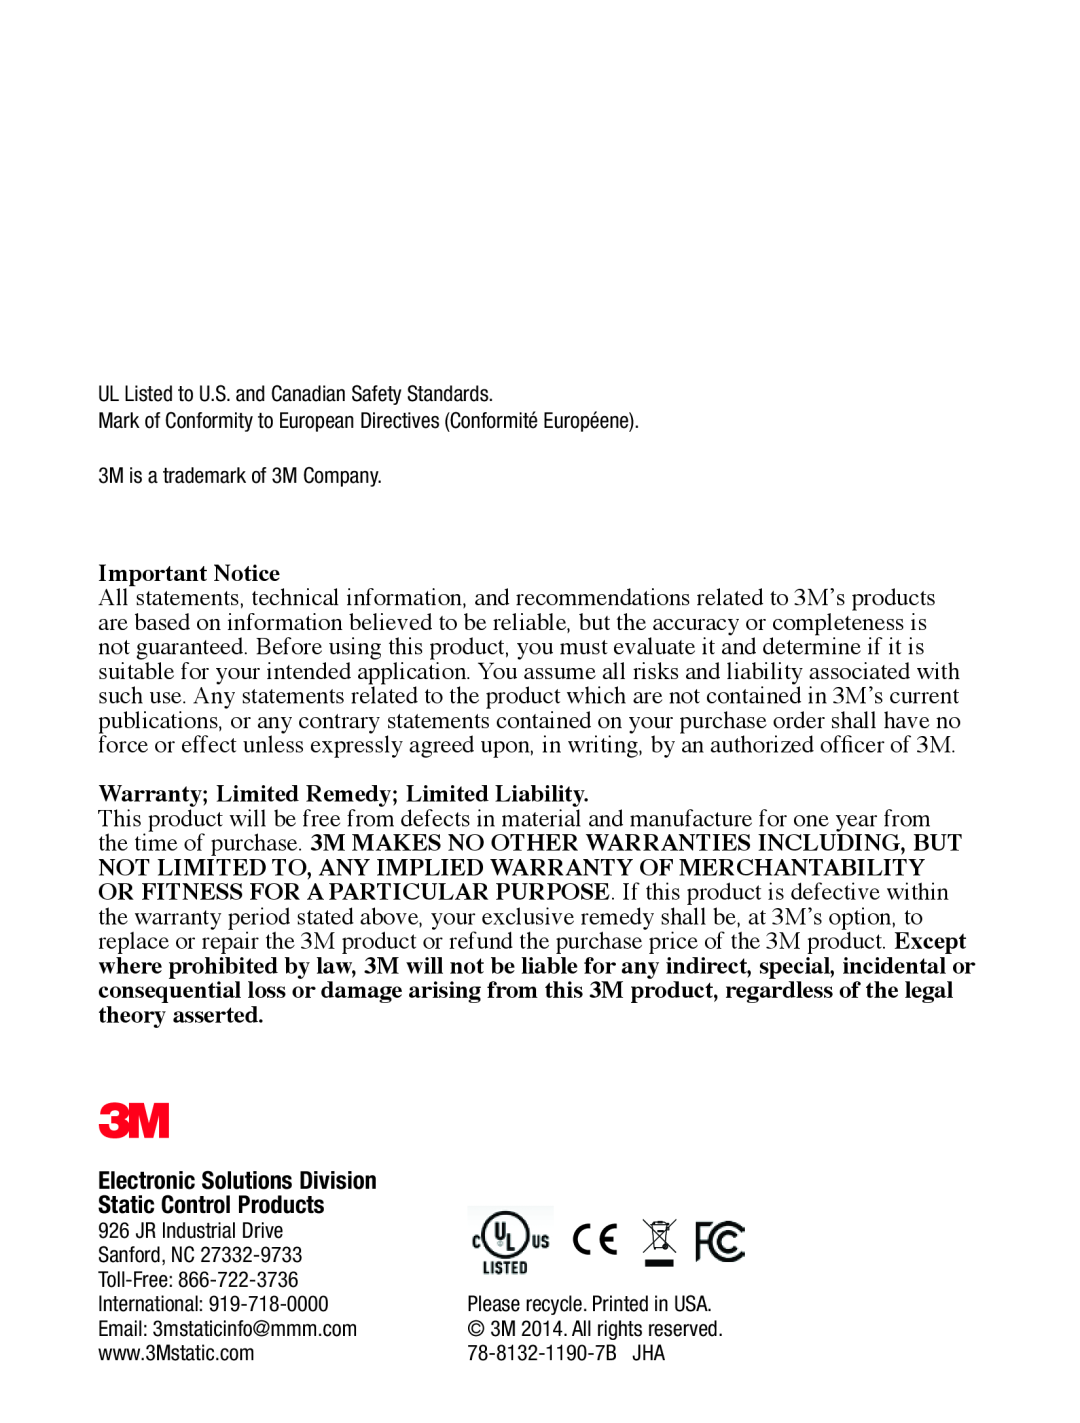 3M 747 manual Important Notice, Electronic Solutions Division Static Control Products 